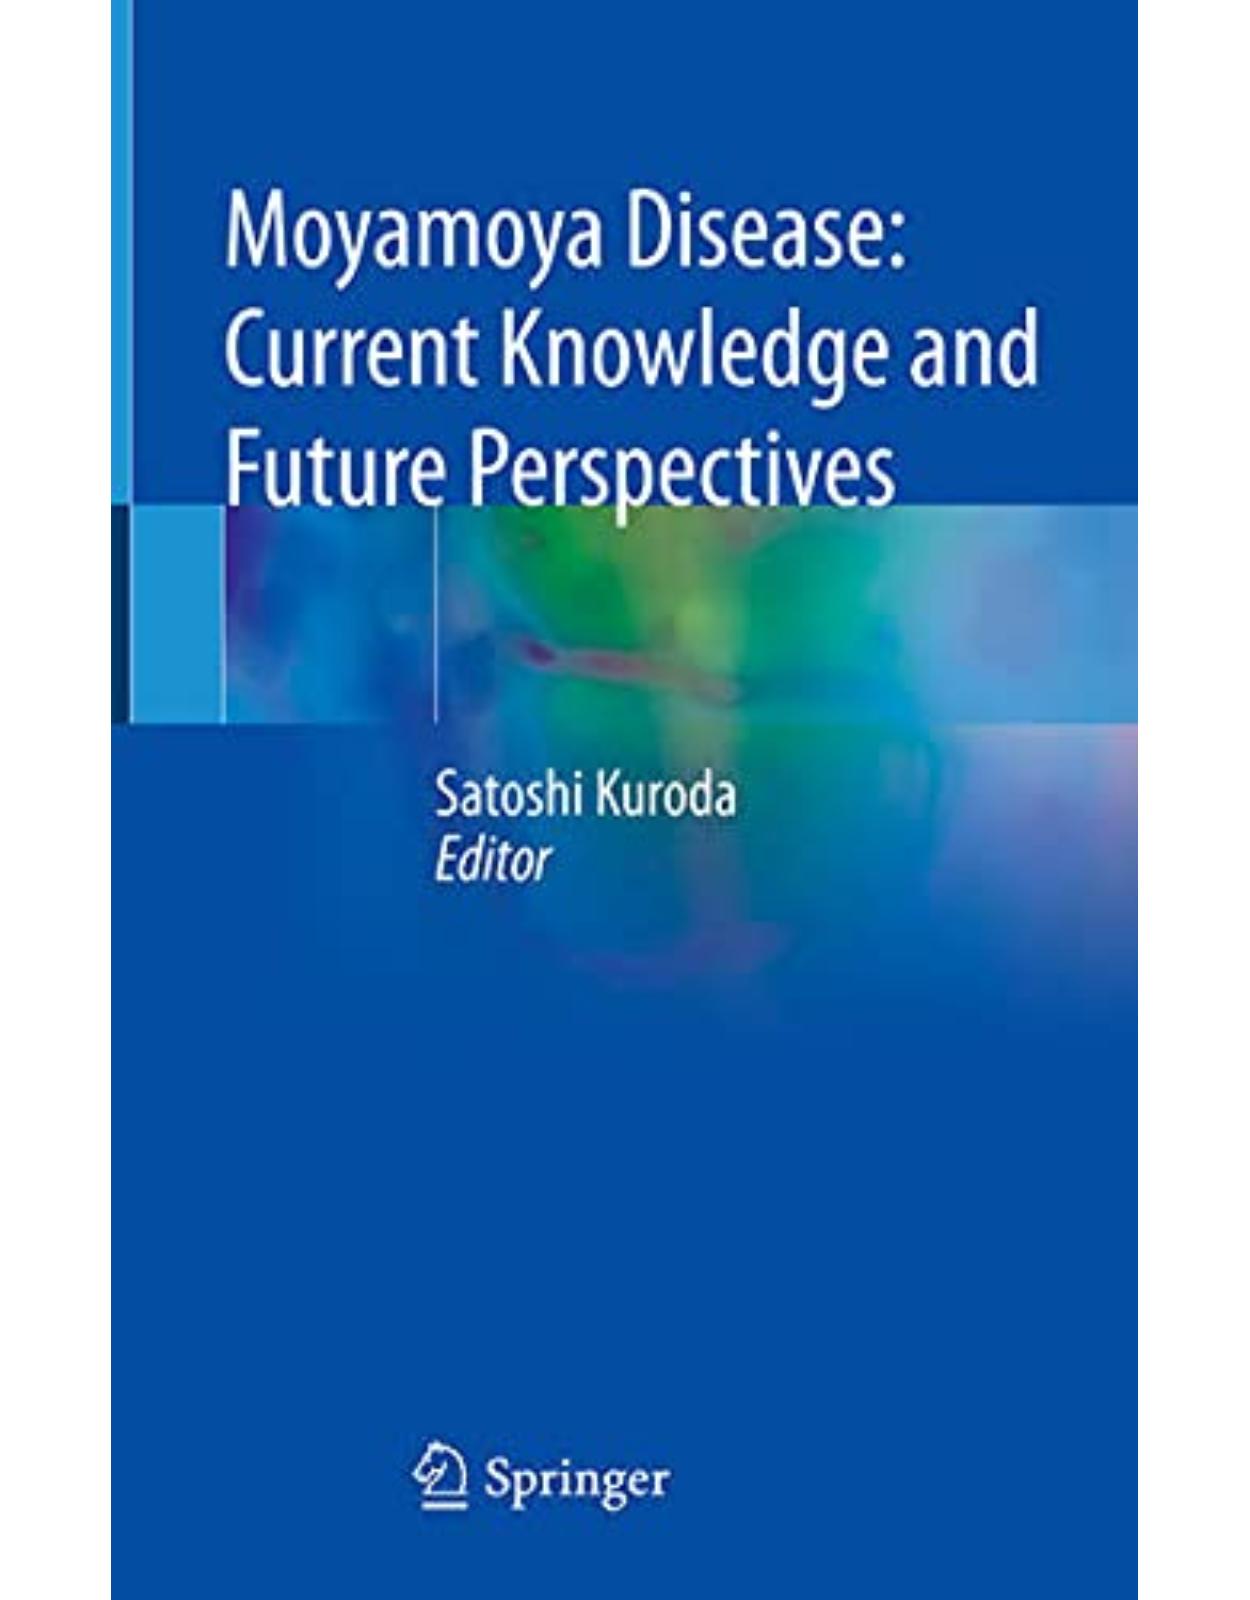 Moyamoya Disease: Current Knowledge and Future Perspectives